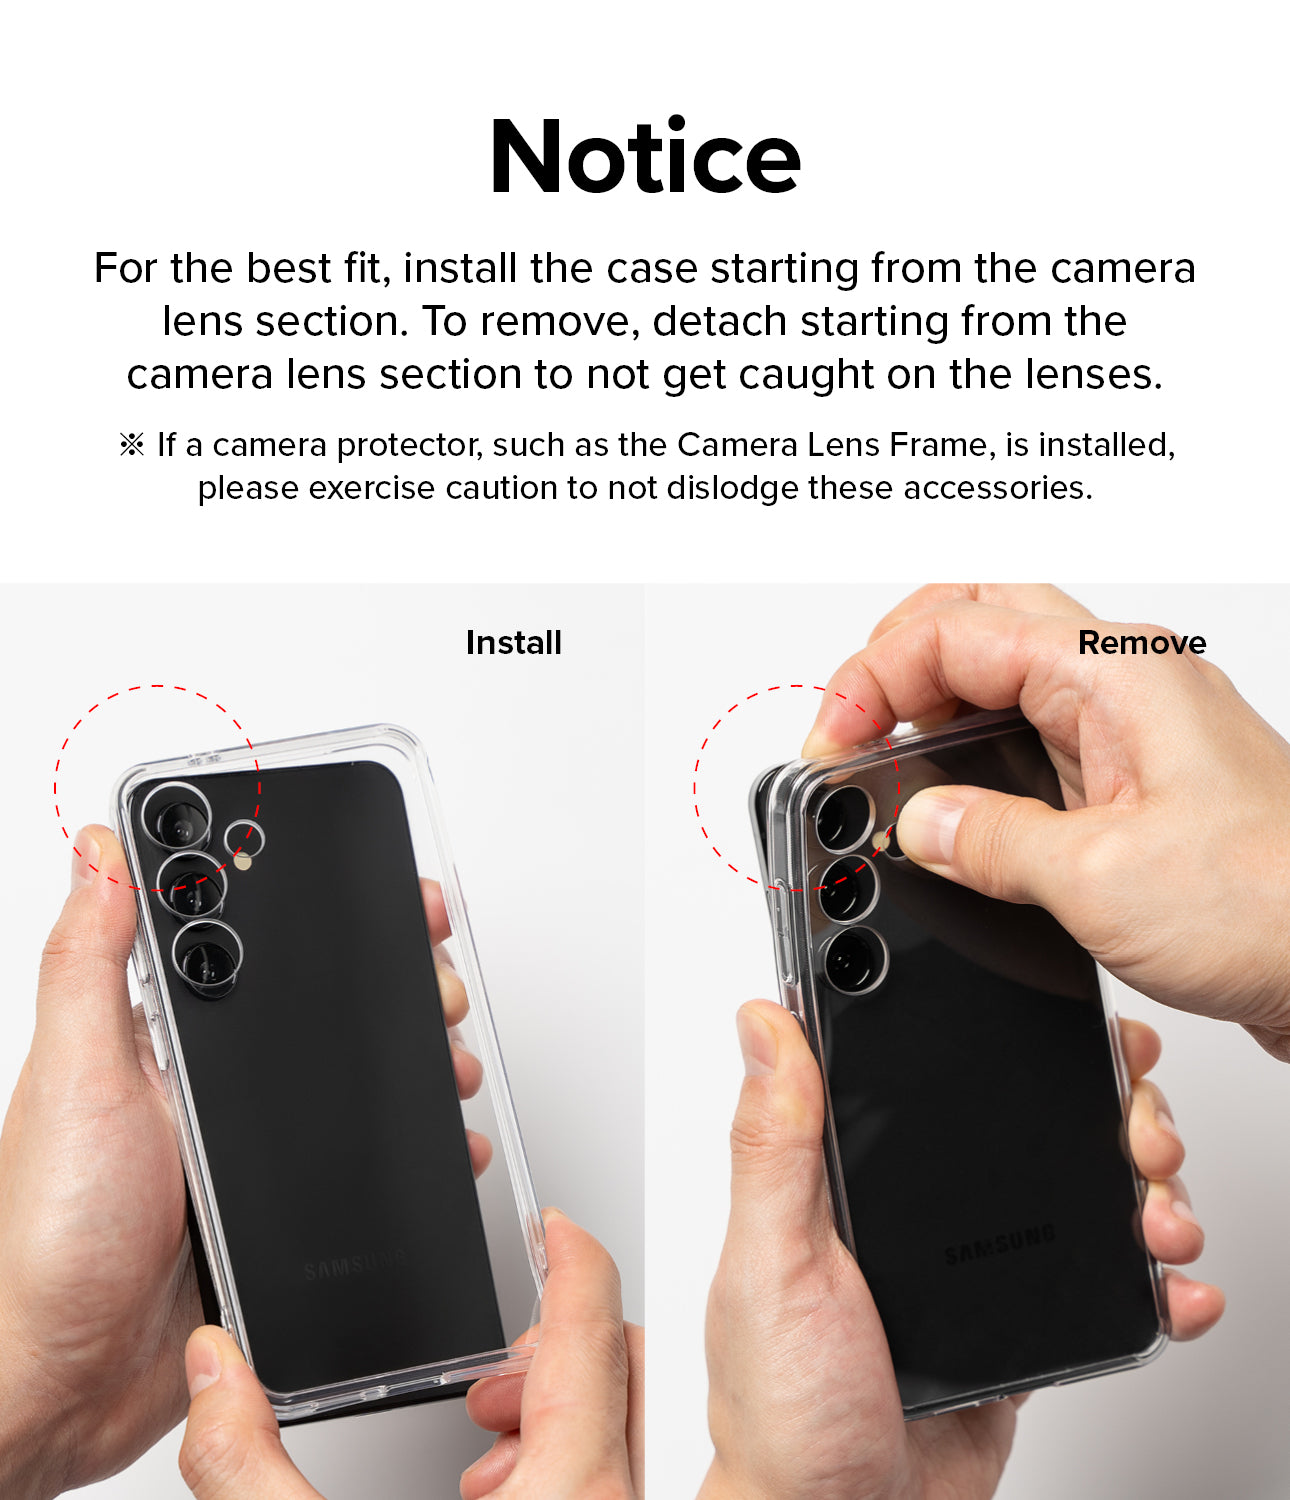 Galaxy A55 Case | Fusion Matte - Notice. For the best fit, install the case starting from the camera lens section. To remove, detach starting from the camera lens section to not get caught on the lenses.